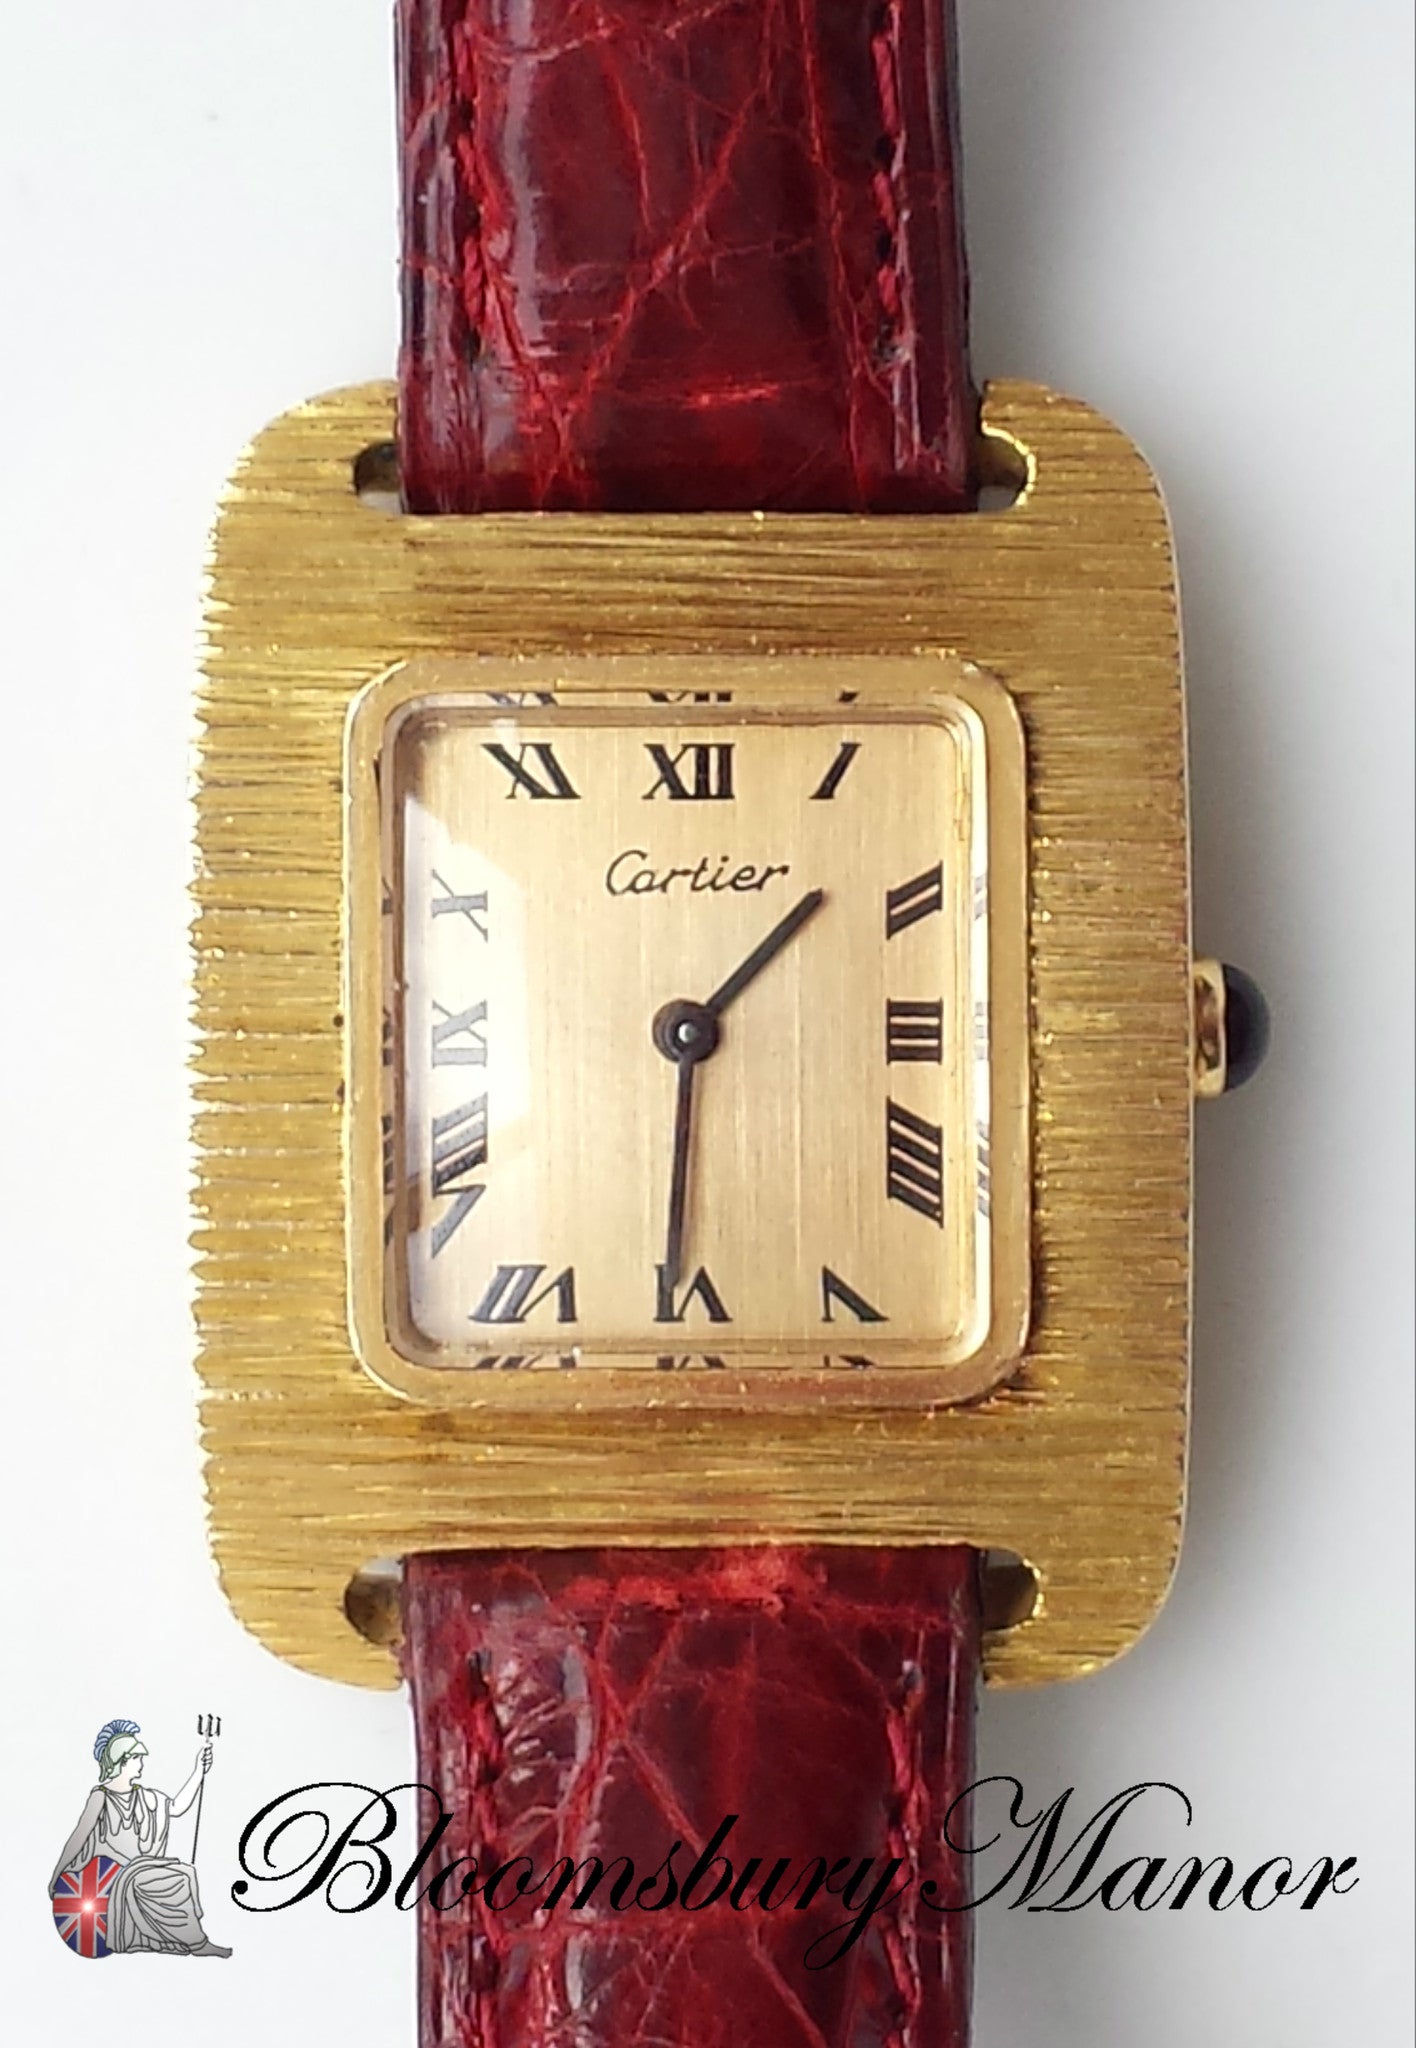 Cartier 1970s Vintage Solid 18K Gold Watch with 17 Jewel Swiss Movement